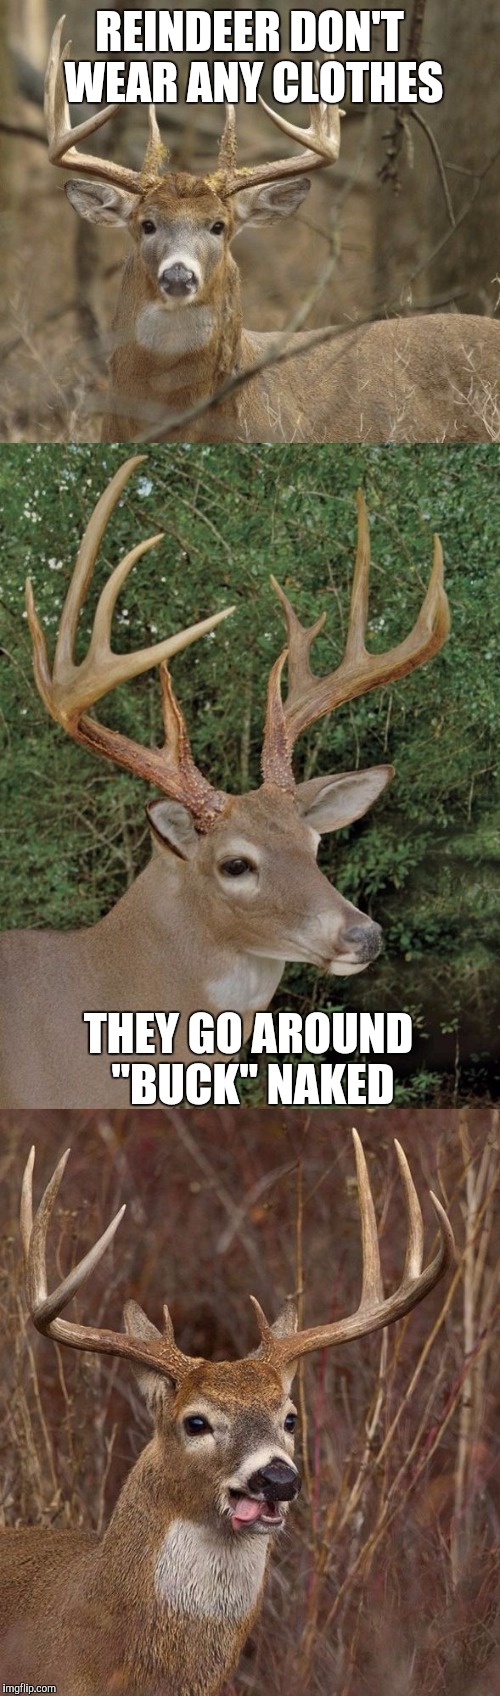 Bad Pun Buck | REINDEER DON'T WEAR ANY CLOTHES; THEY GO AROUND "BUCK" NAKED | image tagged in bad pun buck | made w/ Imgflip meme maker